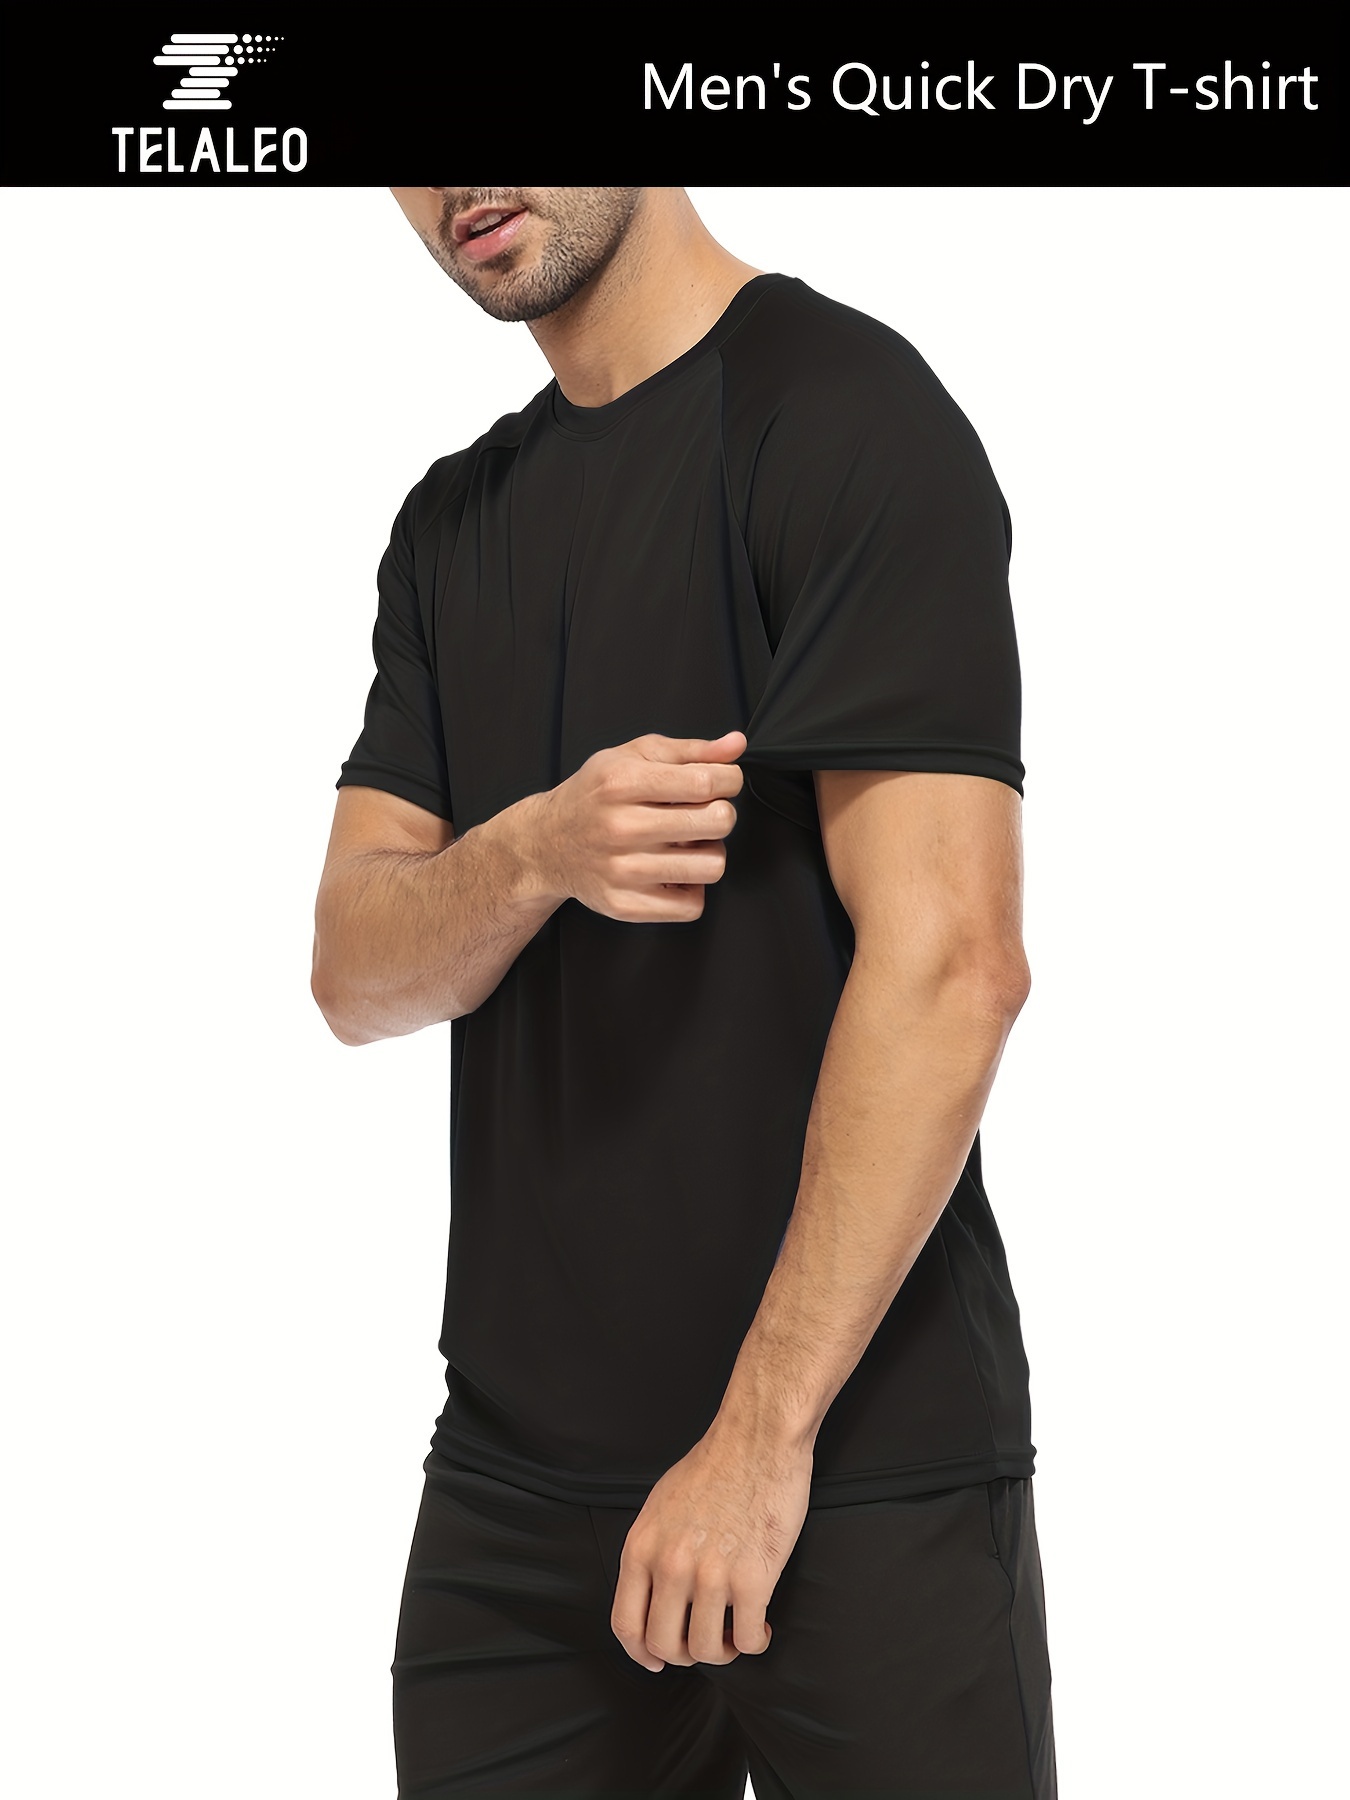 KaLI_store Workout Tops Workout Shirts for Men Short Sleeve Quick